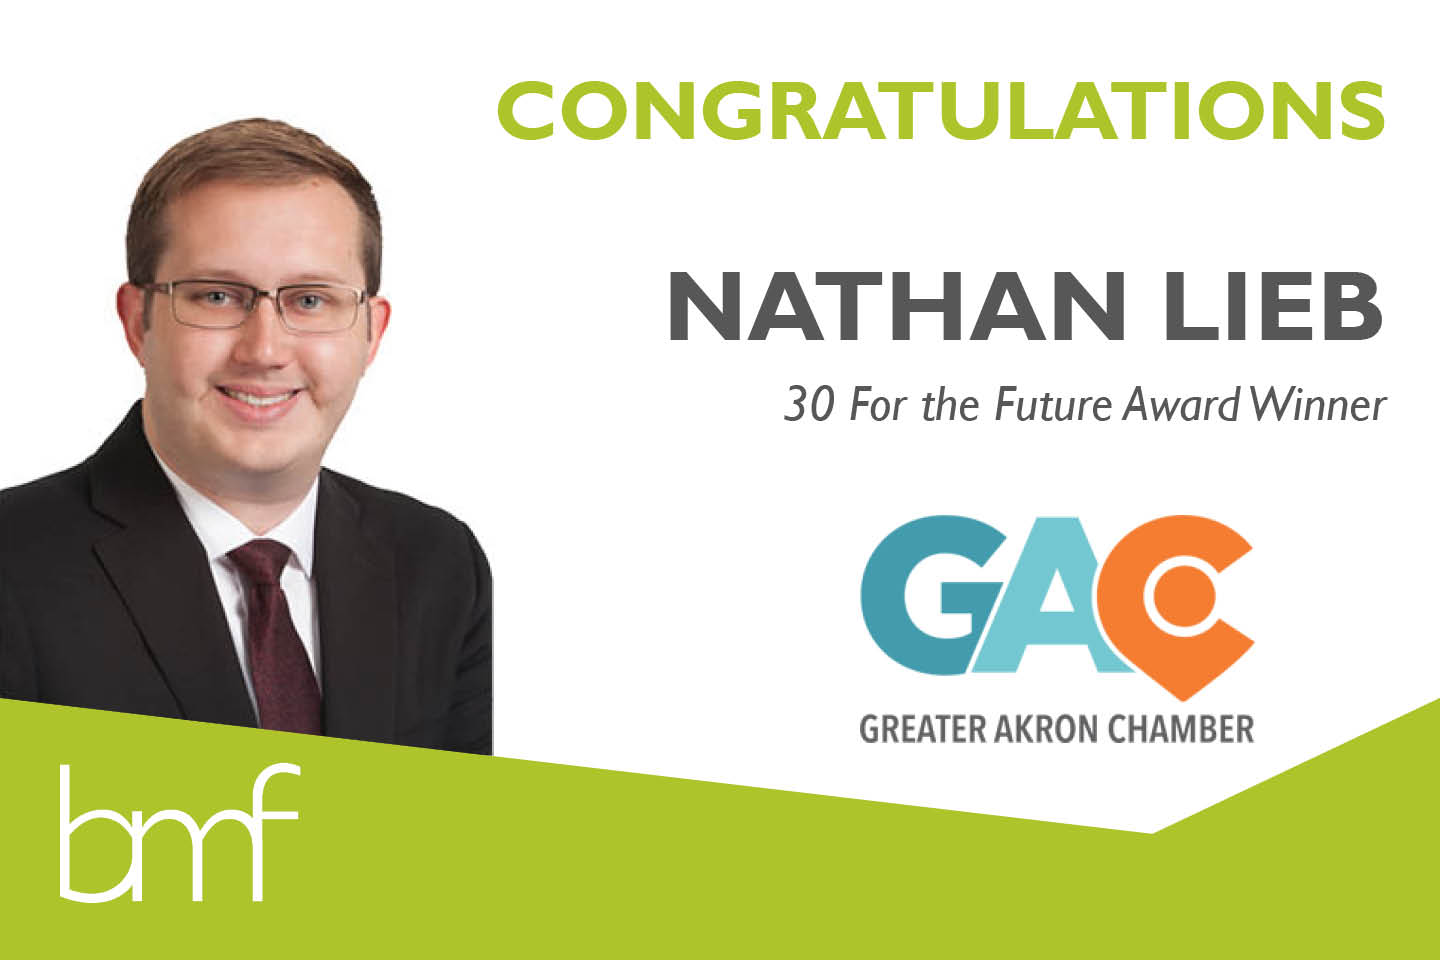 Nathan Lieb Named a 30 For the Future Award Recipient